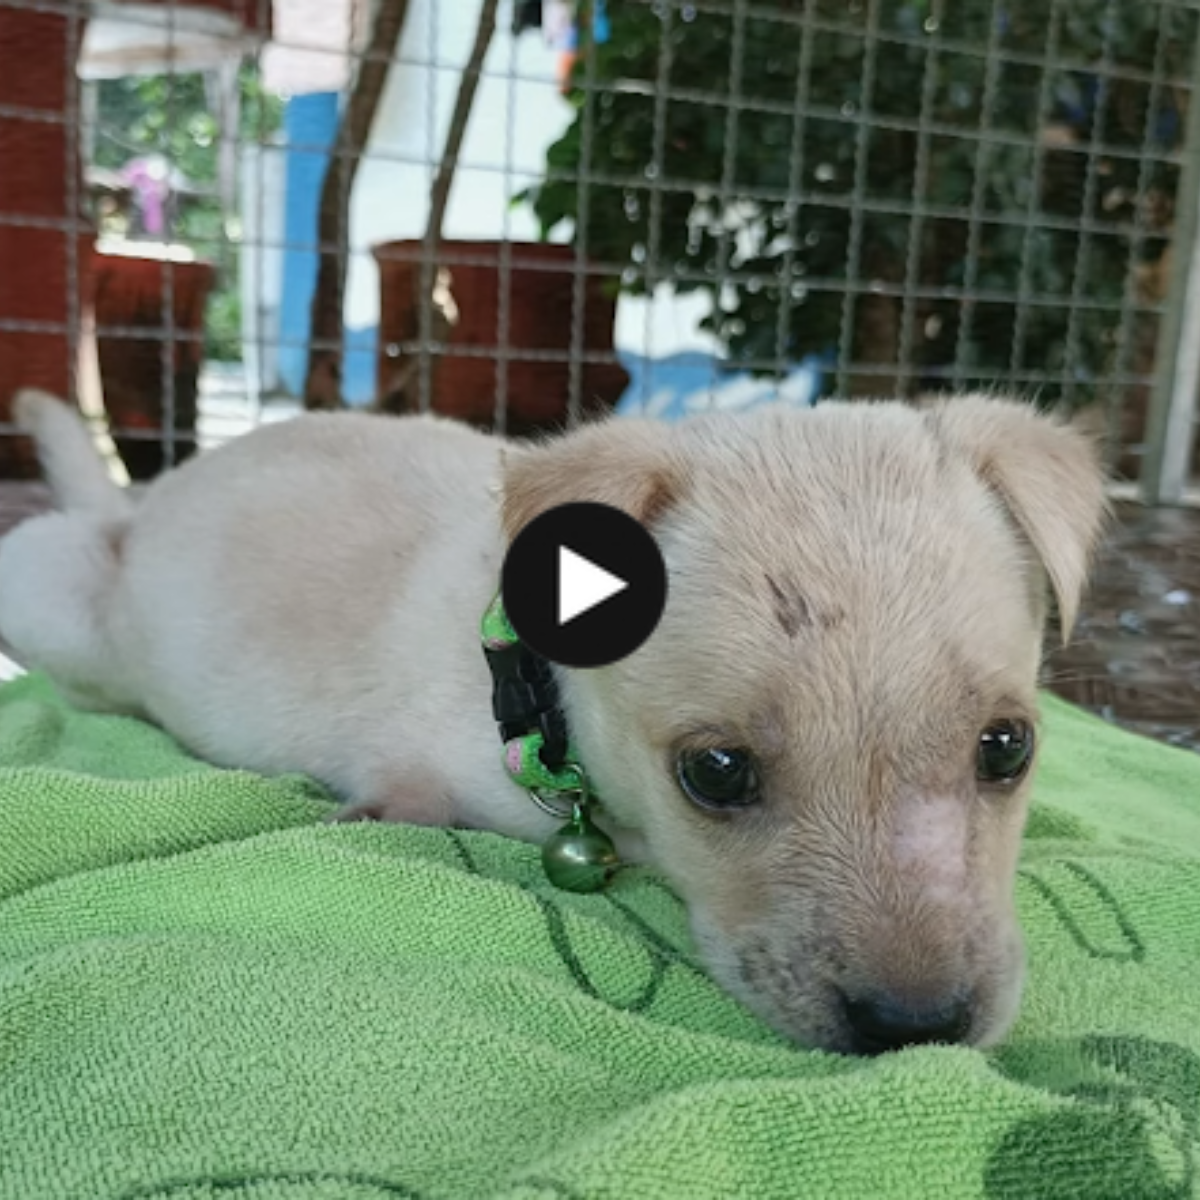 A cute puppy rubs its deformity to relieve discomfort.